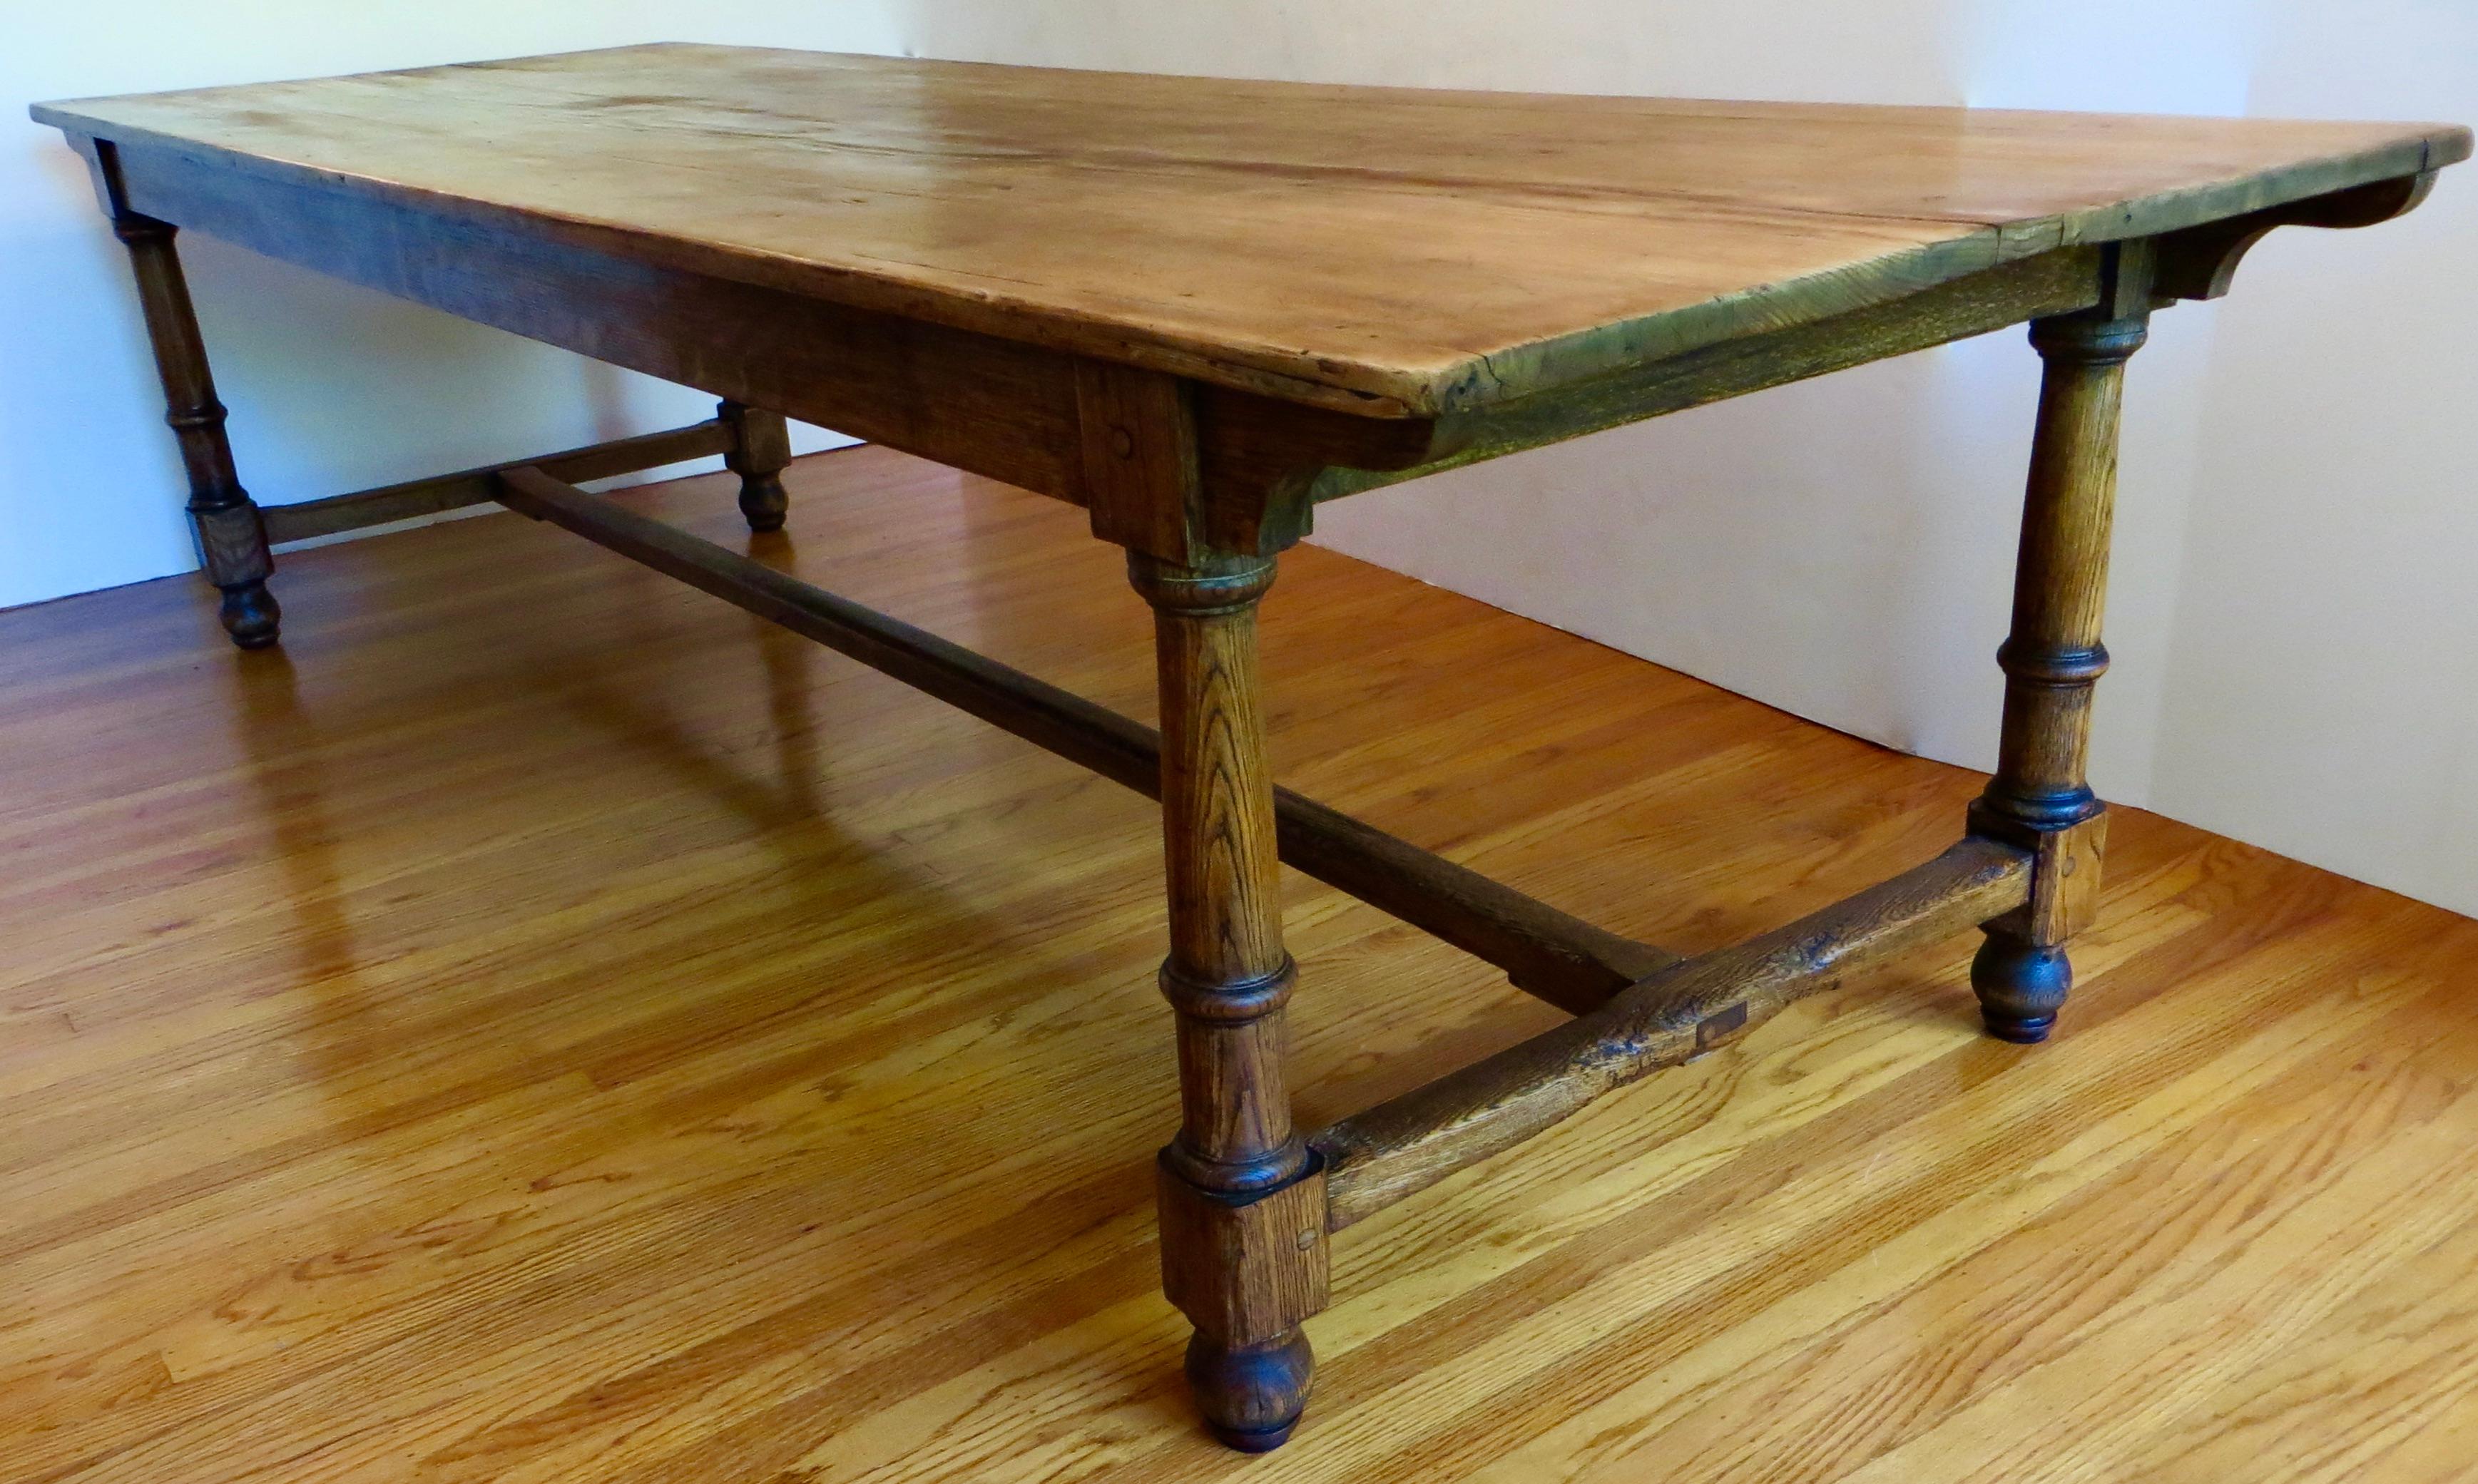 18th century, hard to find large size and solidly well made Georgian provincial dining table made in England, circa 1790. This triple plank hardwood top comfortably accommodates 10 dining chairs with it's 9' 6